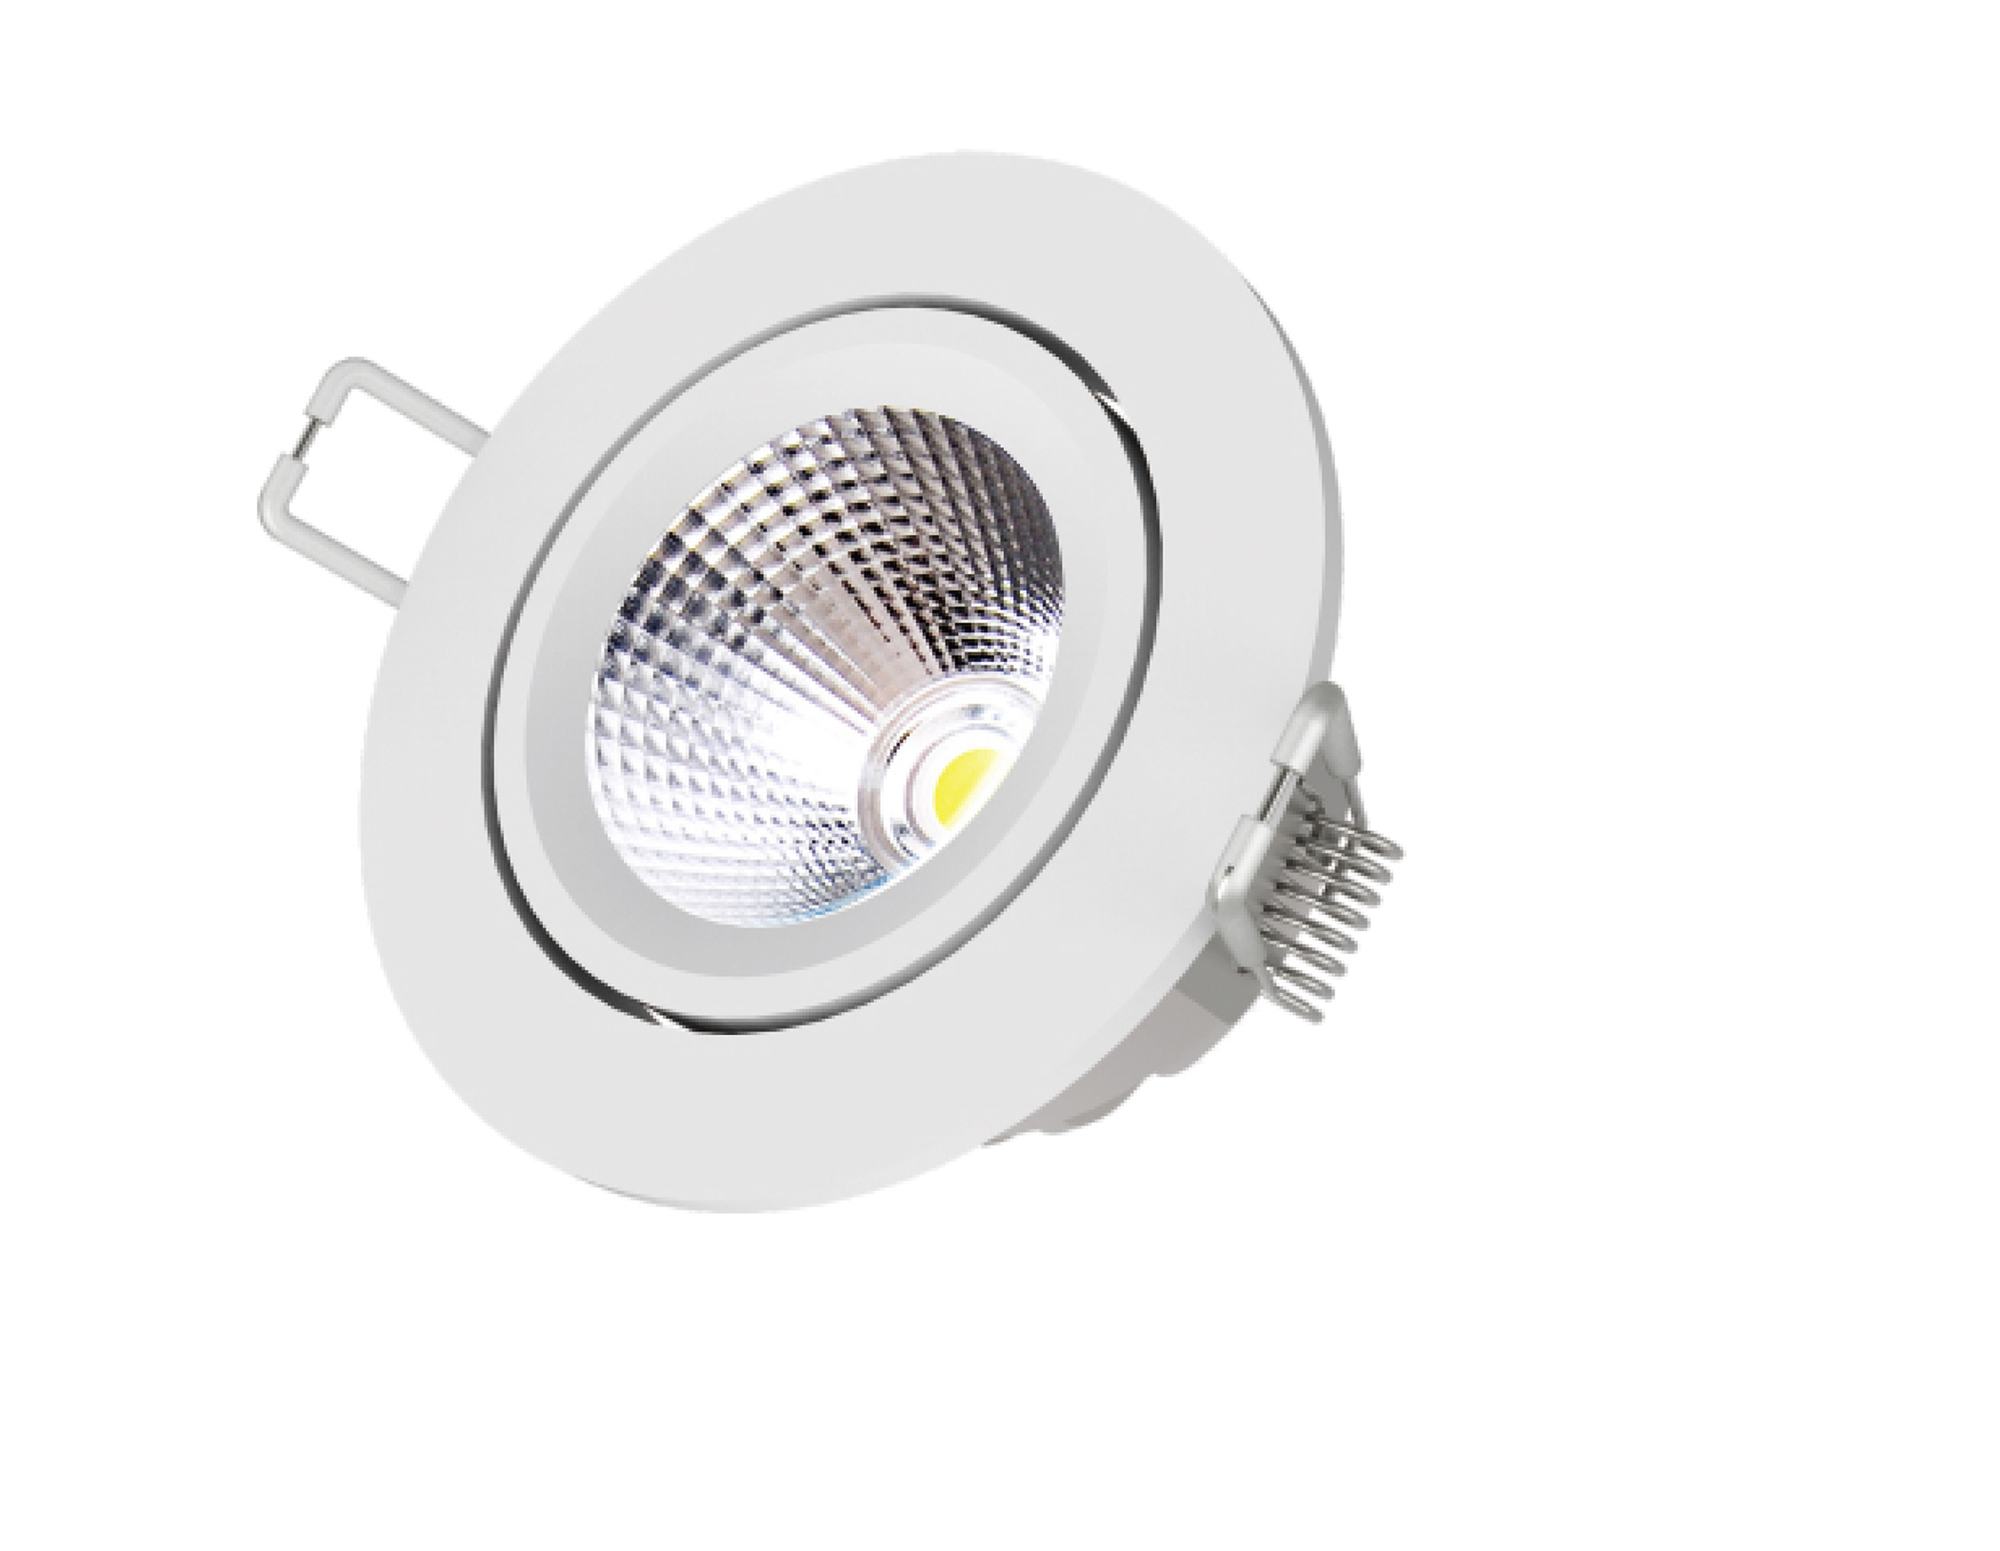 SD-09R-Y  Smart Spot light; RF 2.4GHz; 9W; Dimmable; 3000K; 24 degree beam angle; 200-240Vac; F95mm cut-out; IP20.